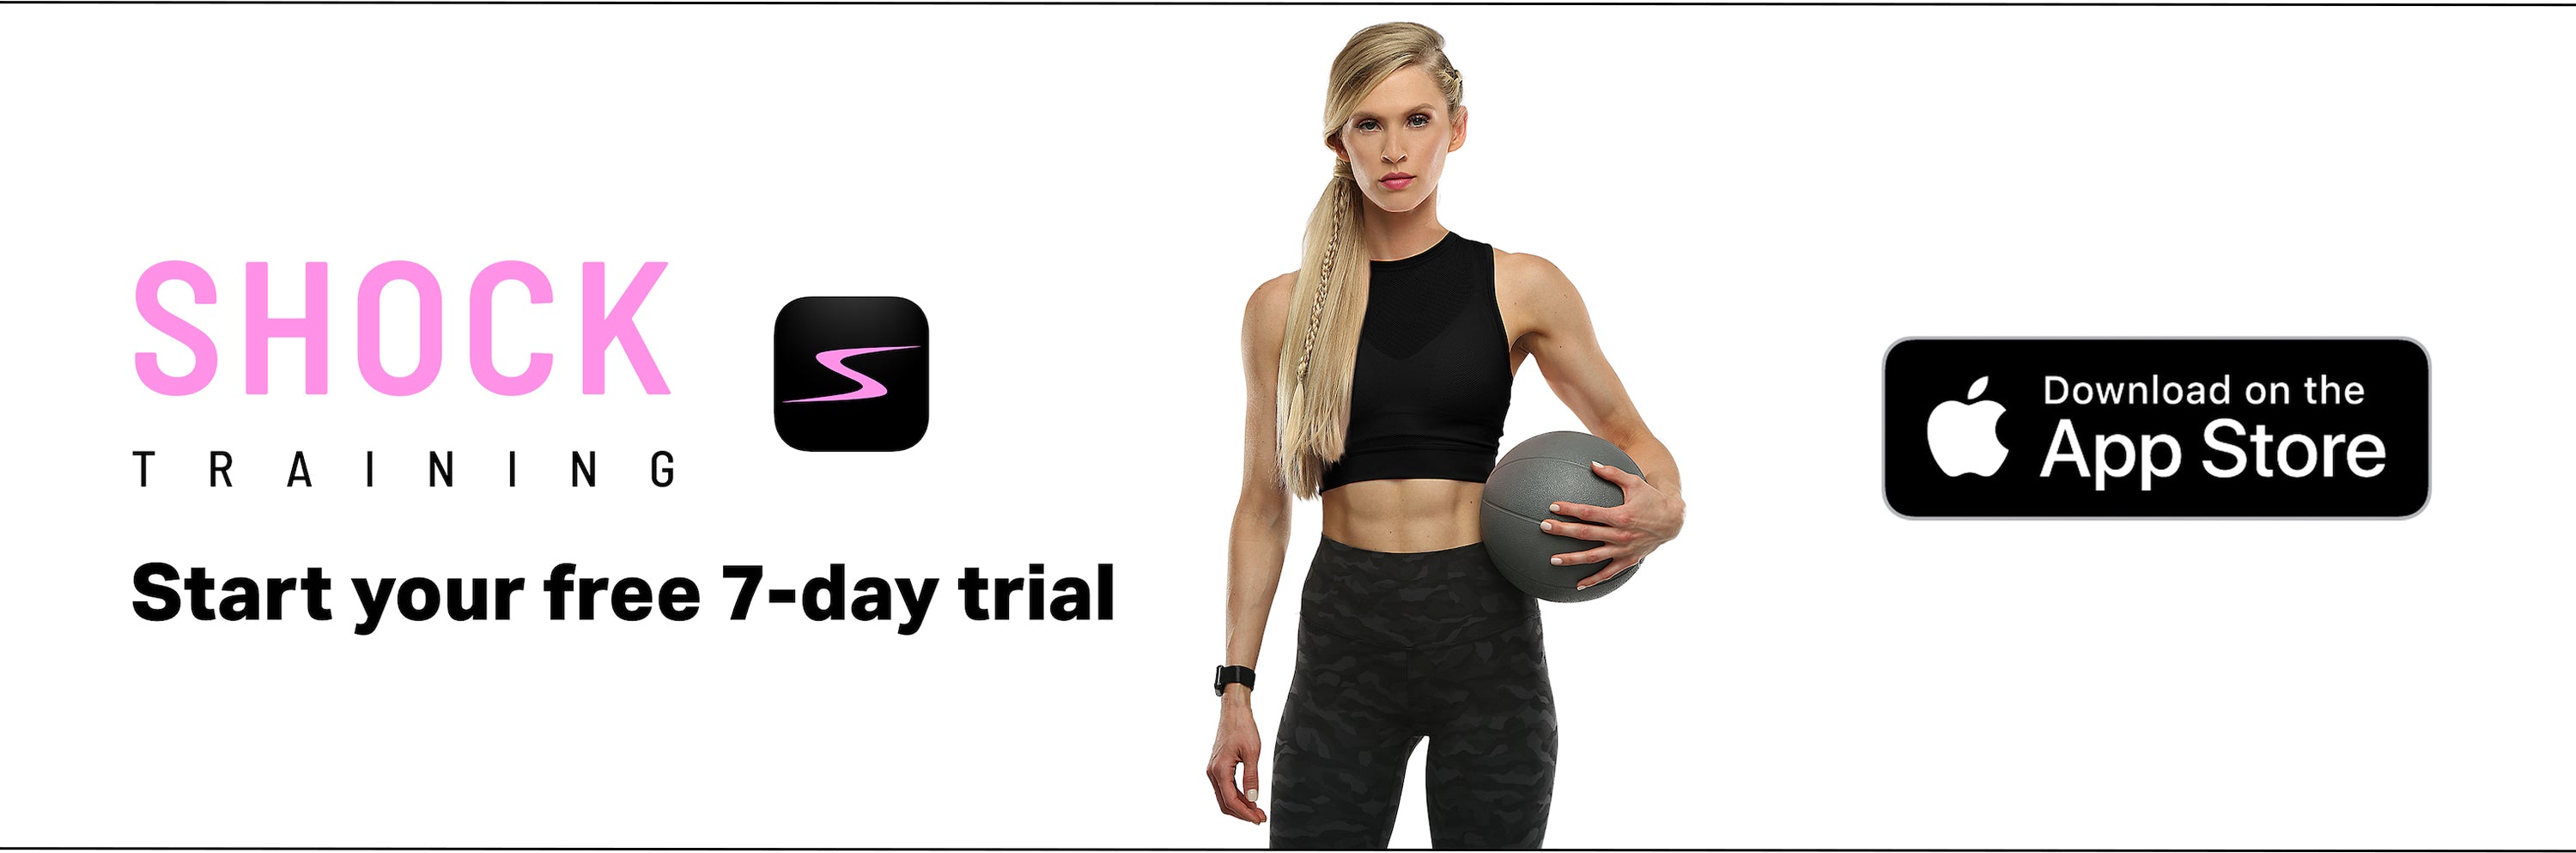 The SHOCK Women's Fitness App gives women a new way to get fit, tone up, and build muscle.